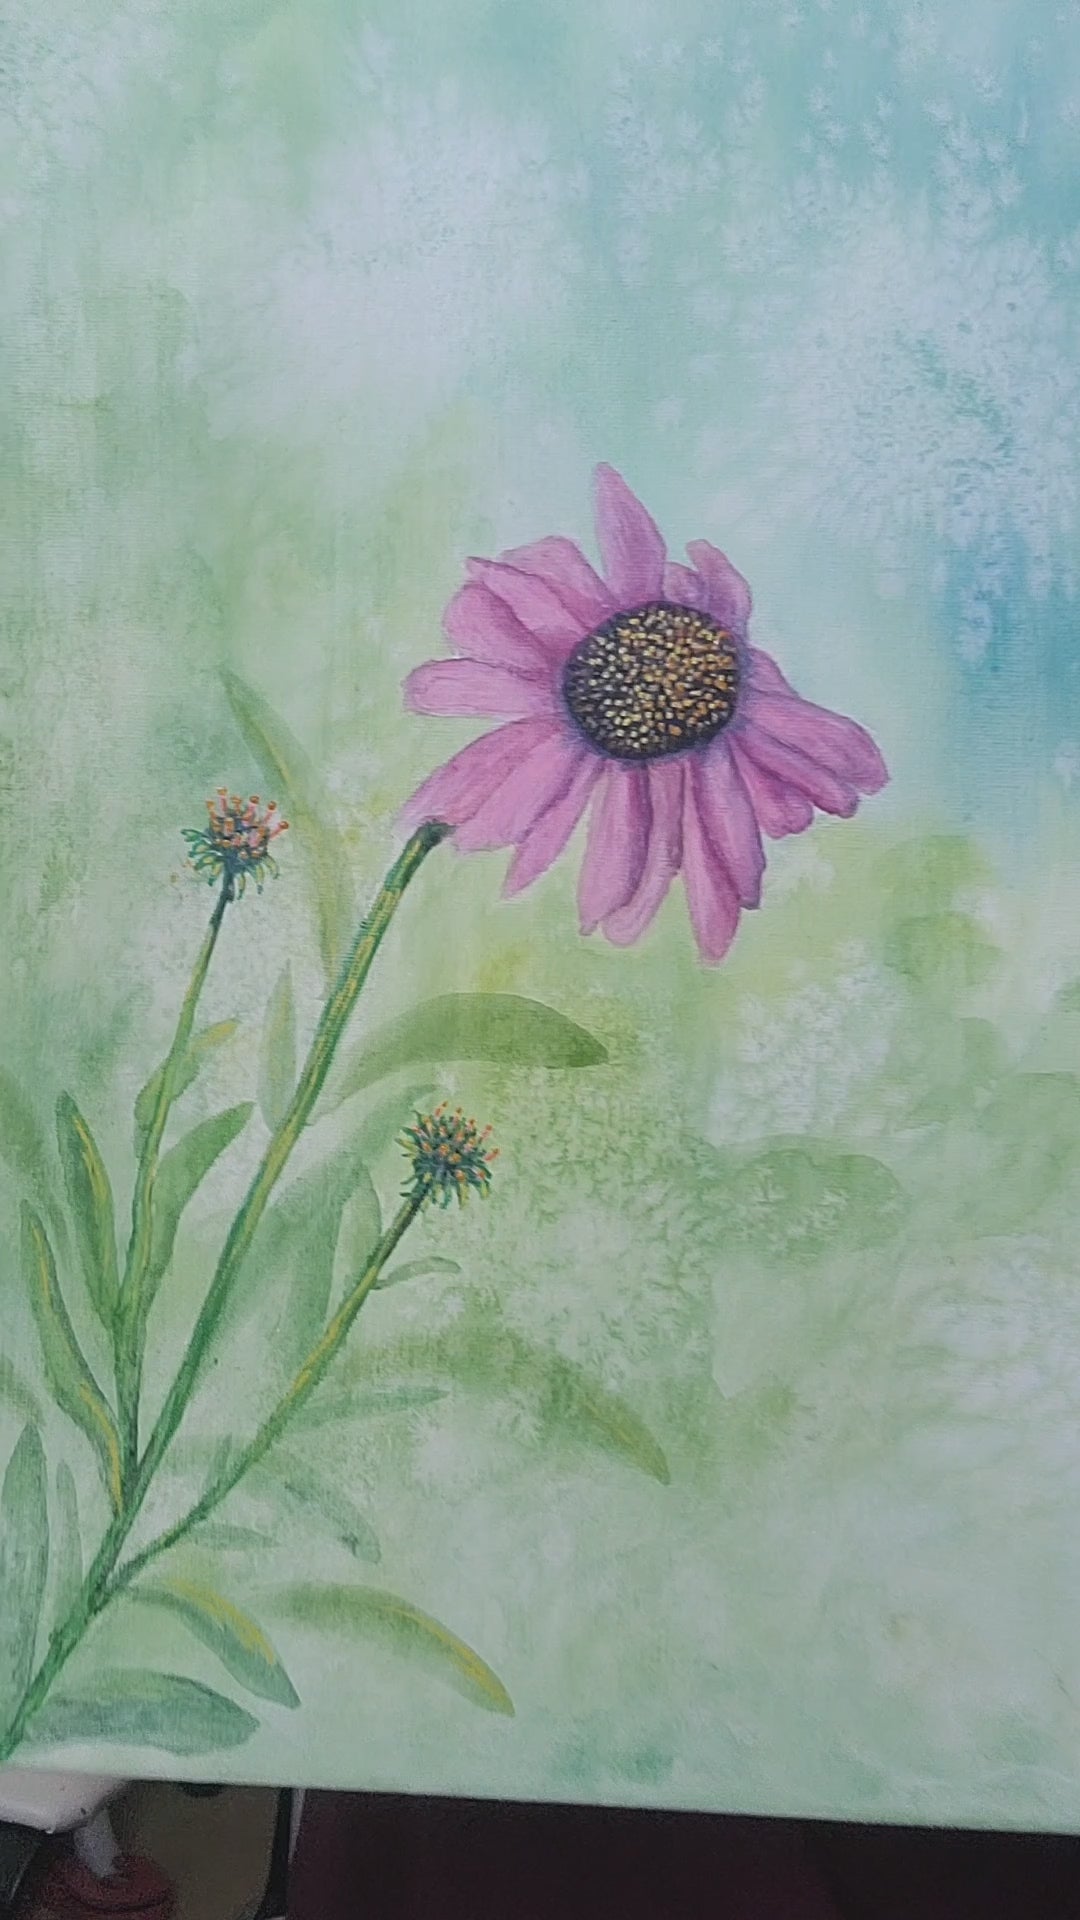 Video showcasing the watercolor on canvas of "Bloom where you are planted" by artist Lynda Krupa, The Artful Lynk